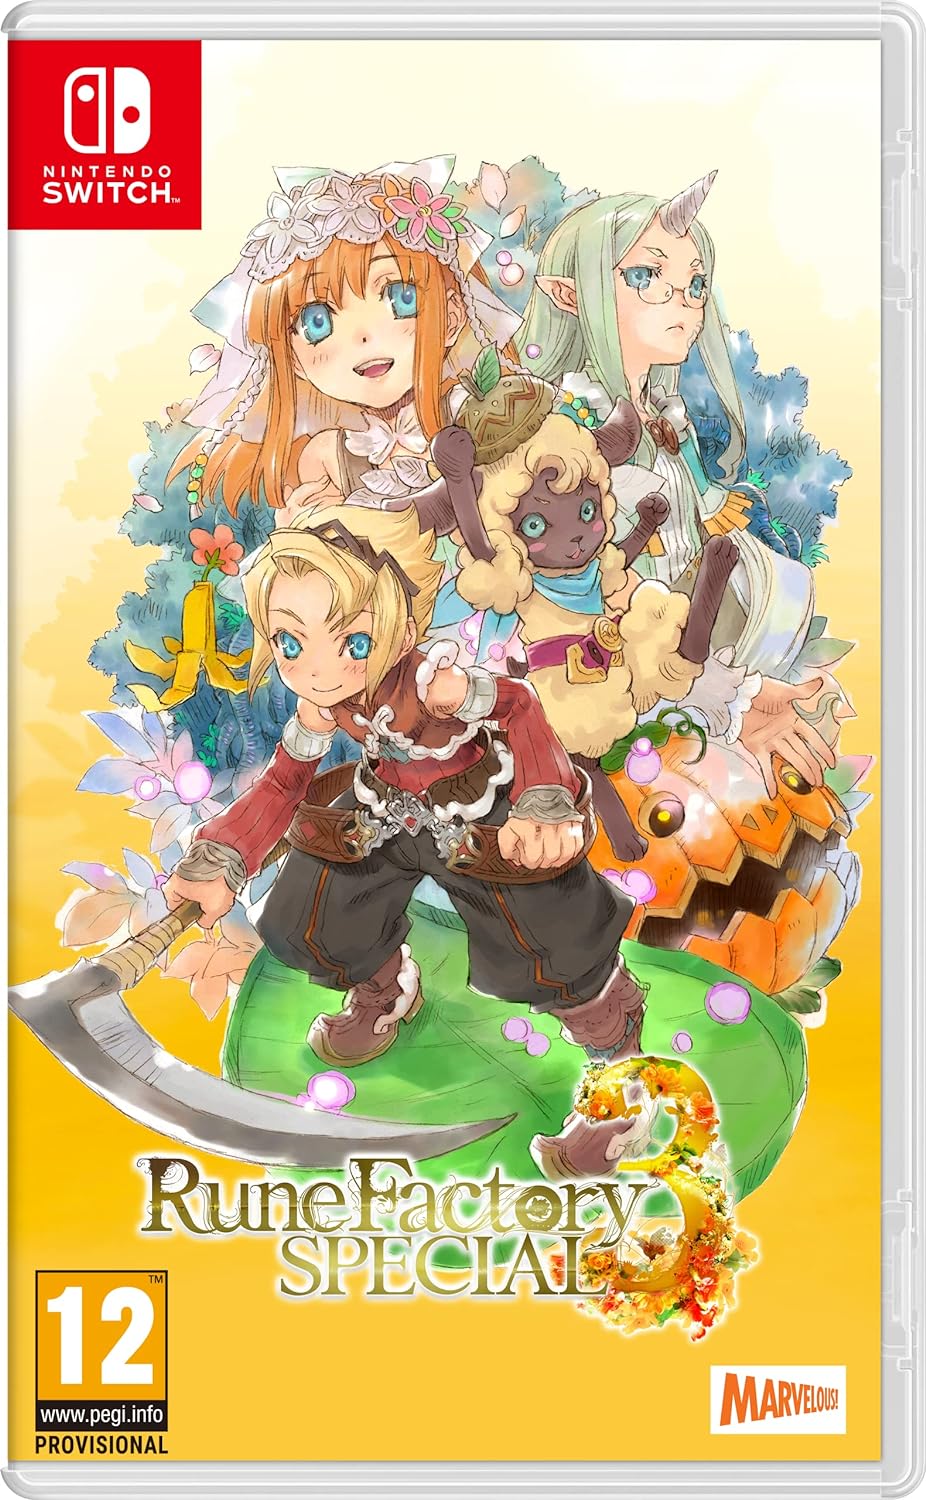 Rune Factory 3 SPECIAL for Nintendo Switch